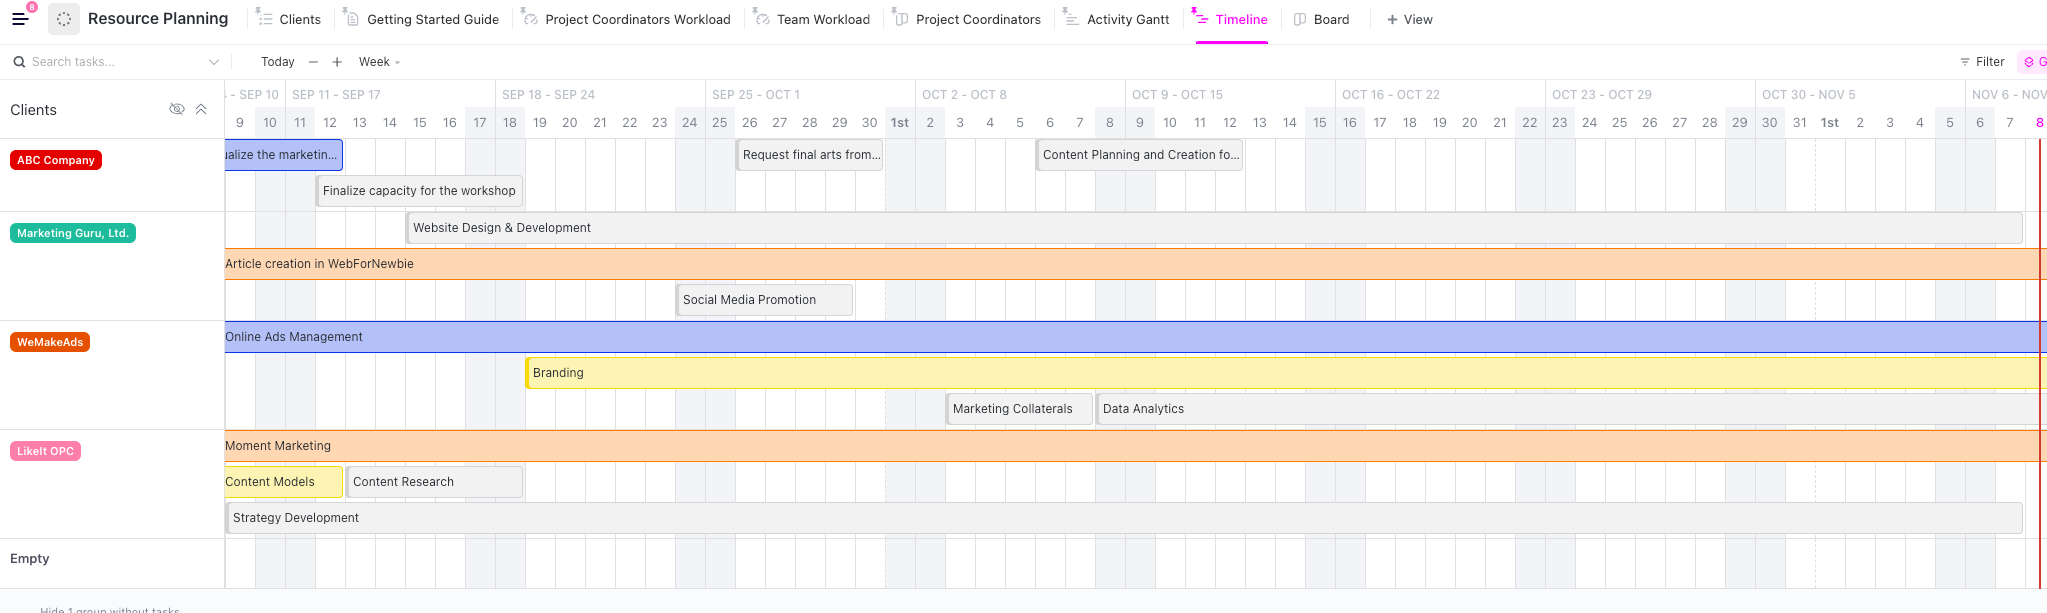 ClickUp Resource Planning Timeline Template